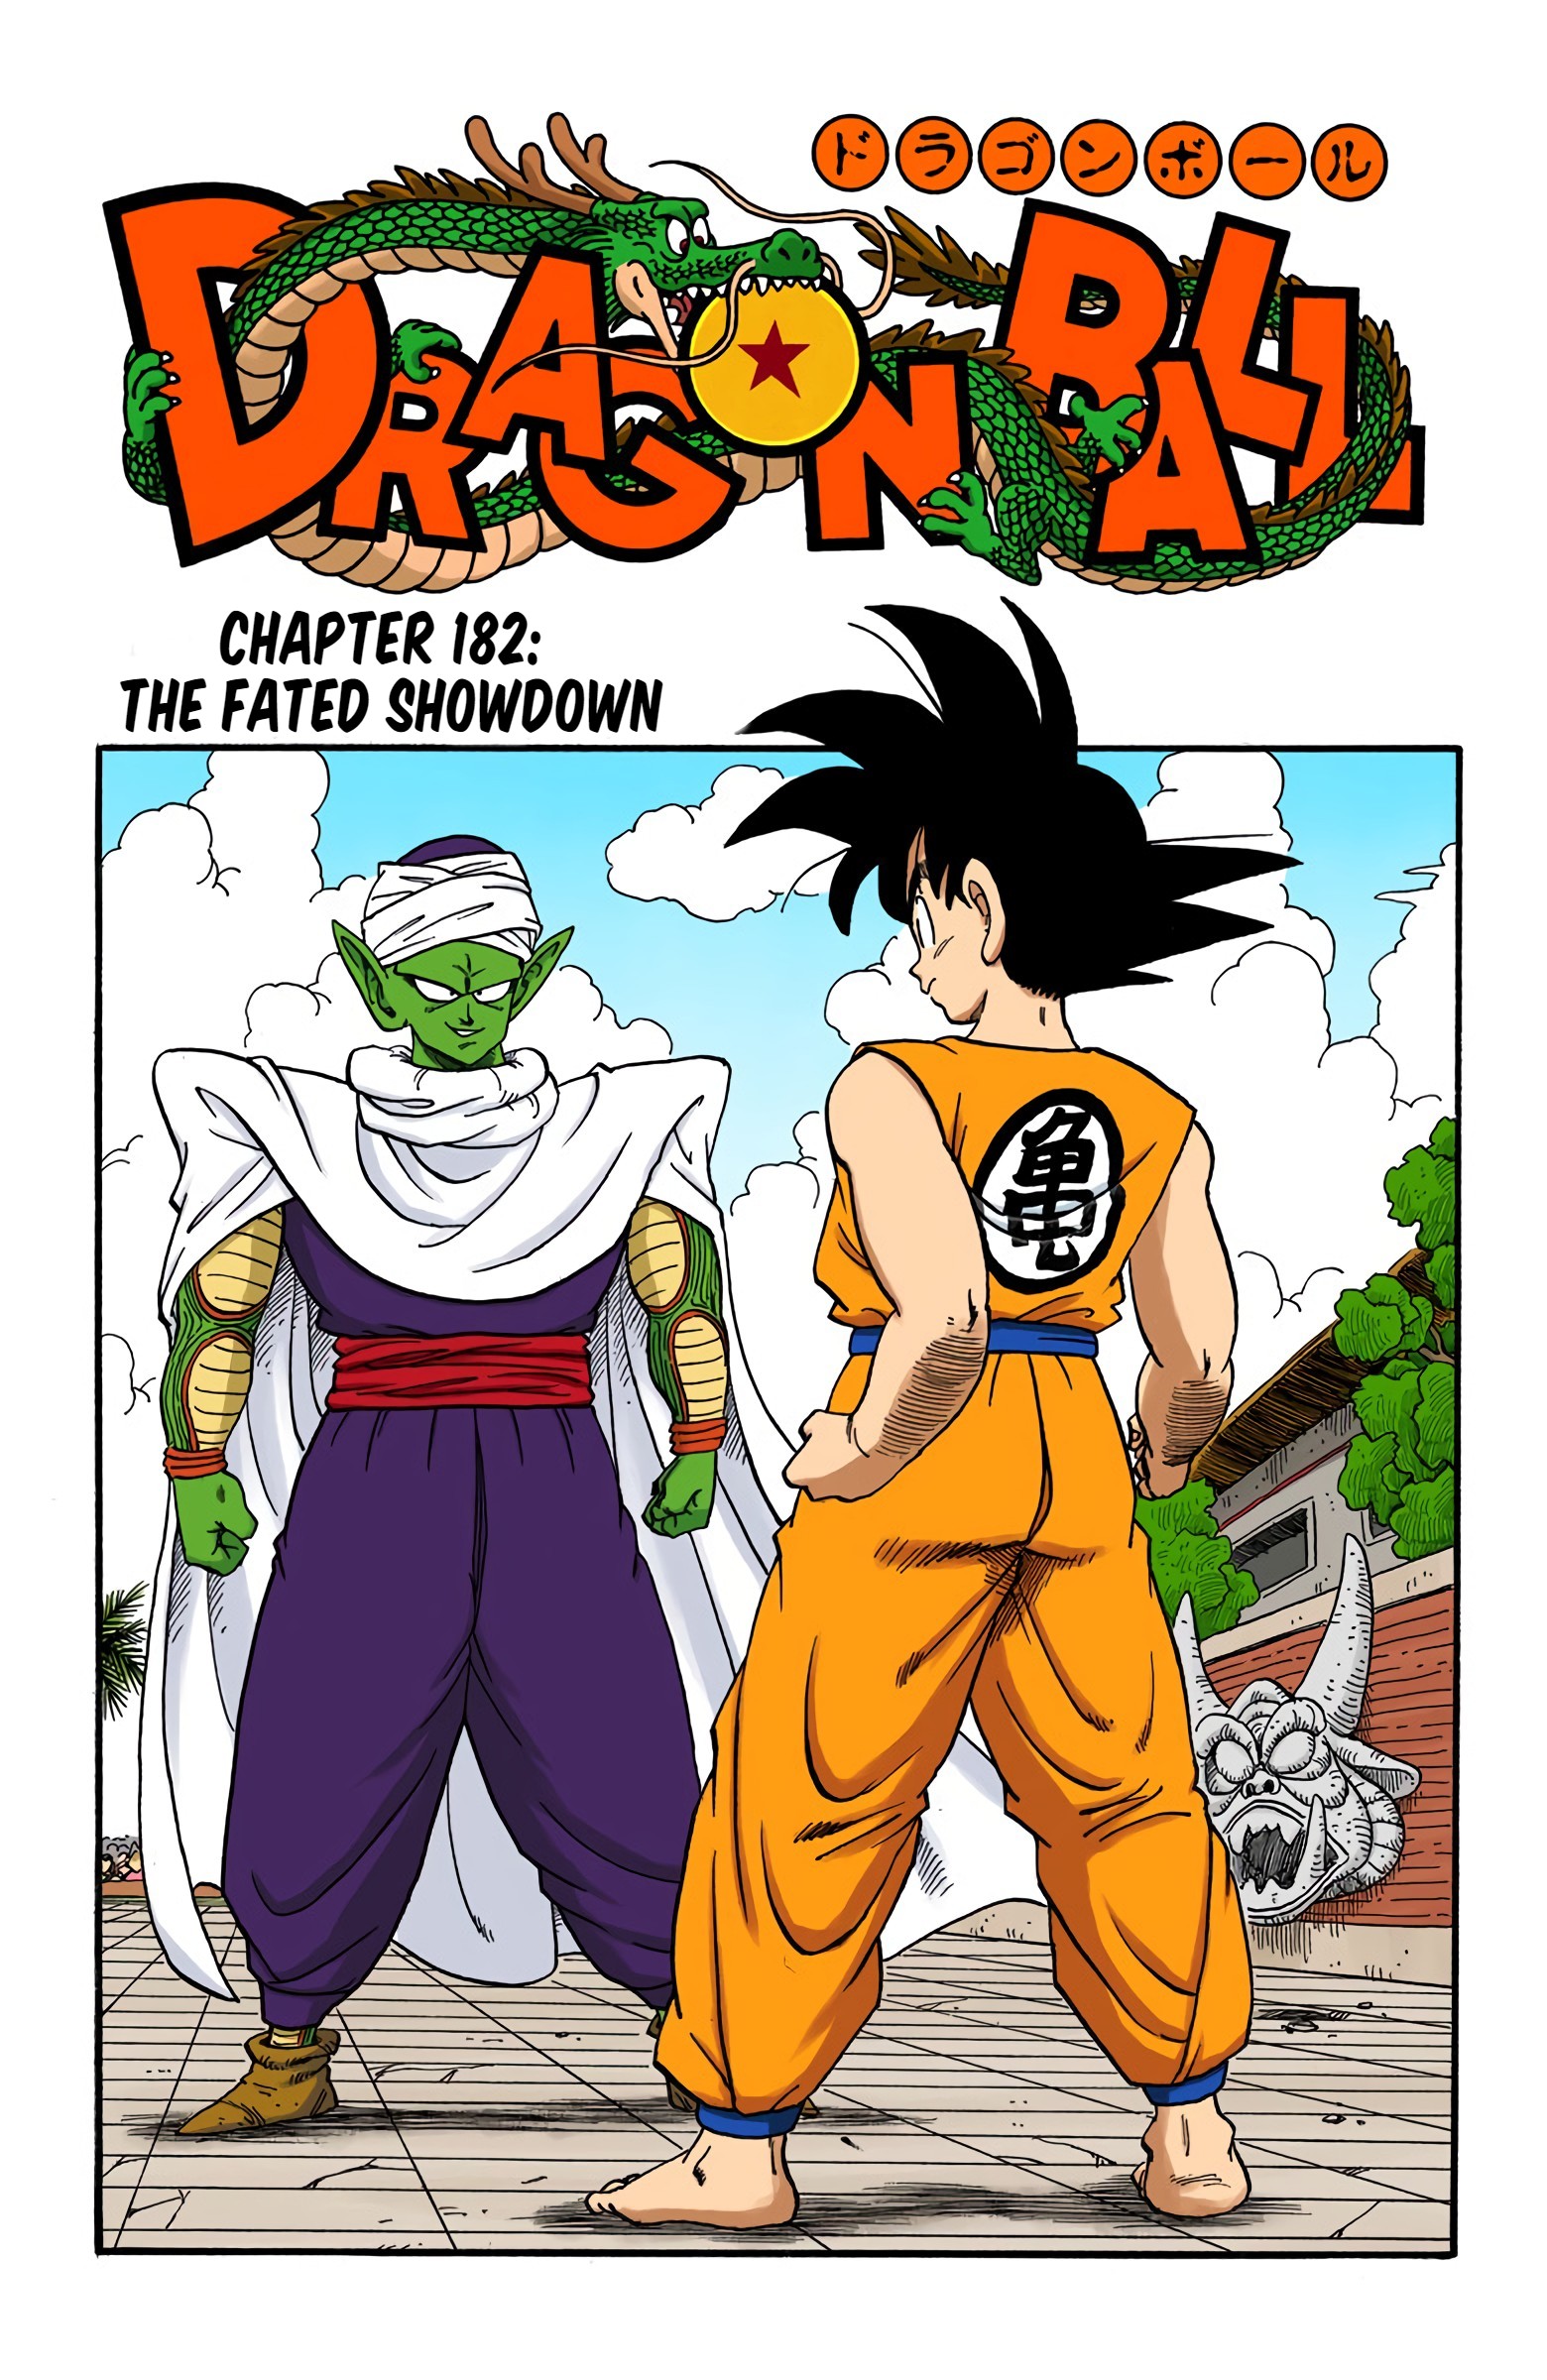 Dragon Ball - Full Color Edition Vol.15 Chapter 182